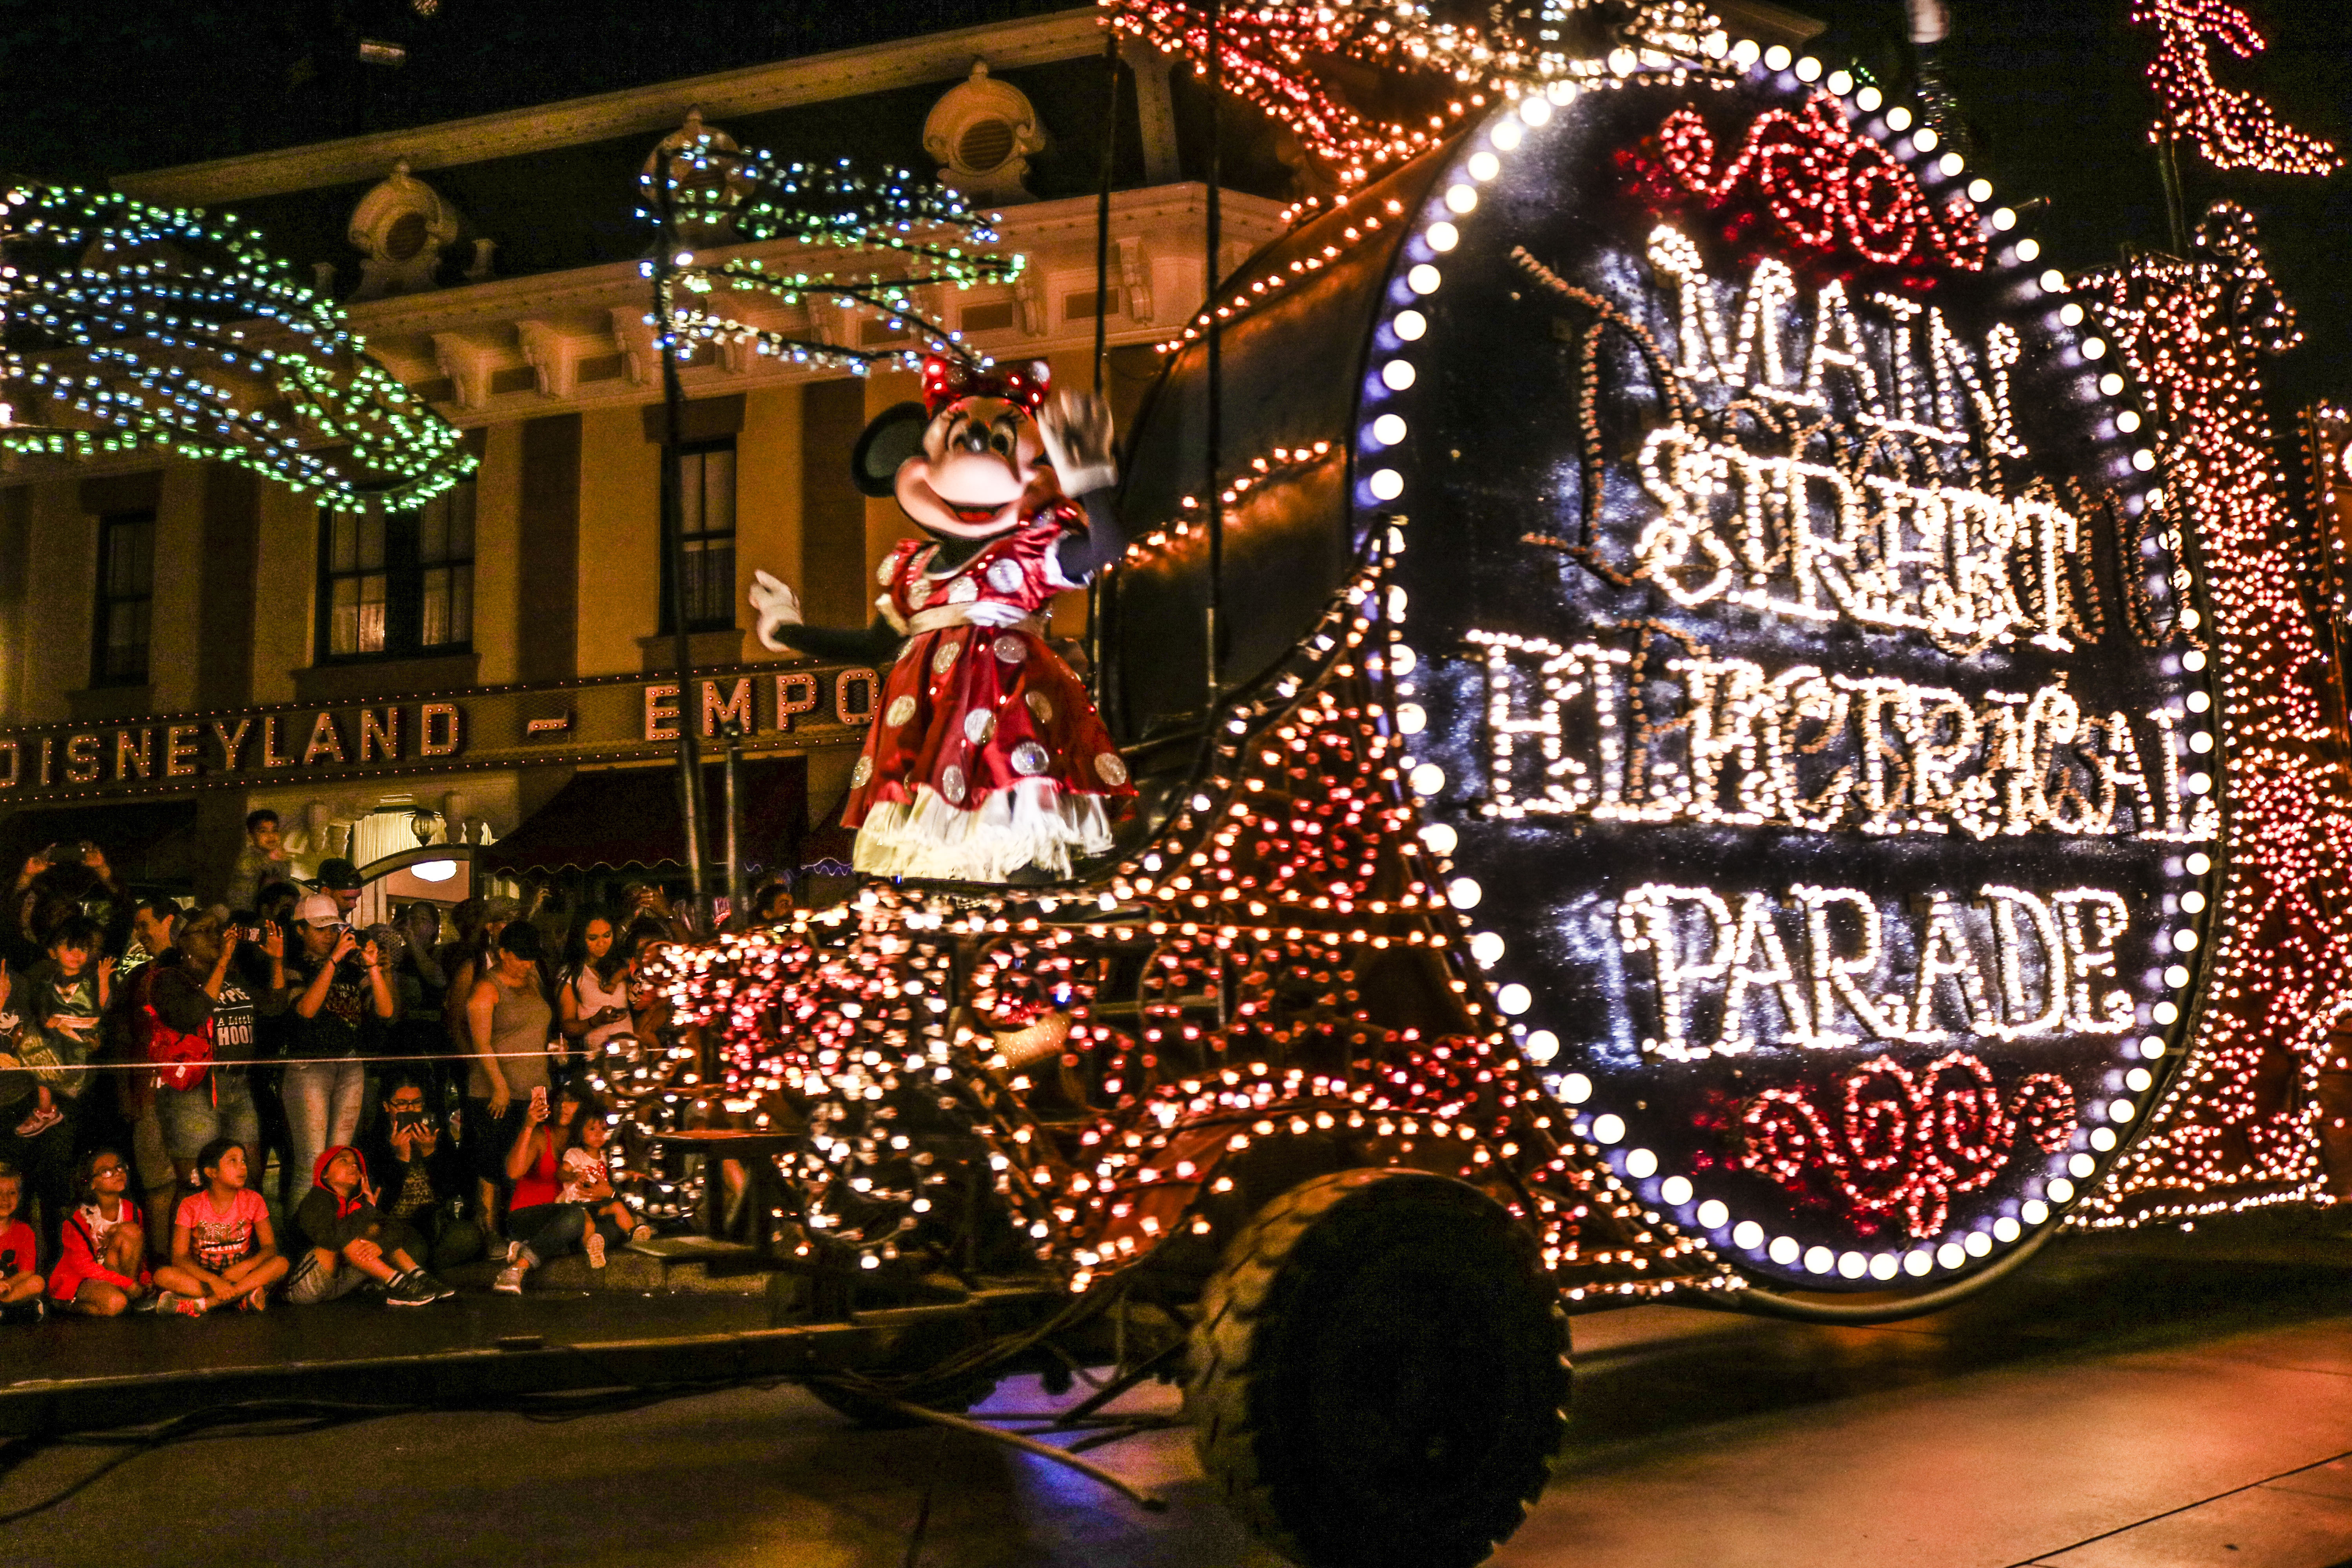 Minnie greets guests during the Main Street Electrical Parade at Disneyland. 